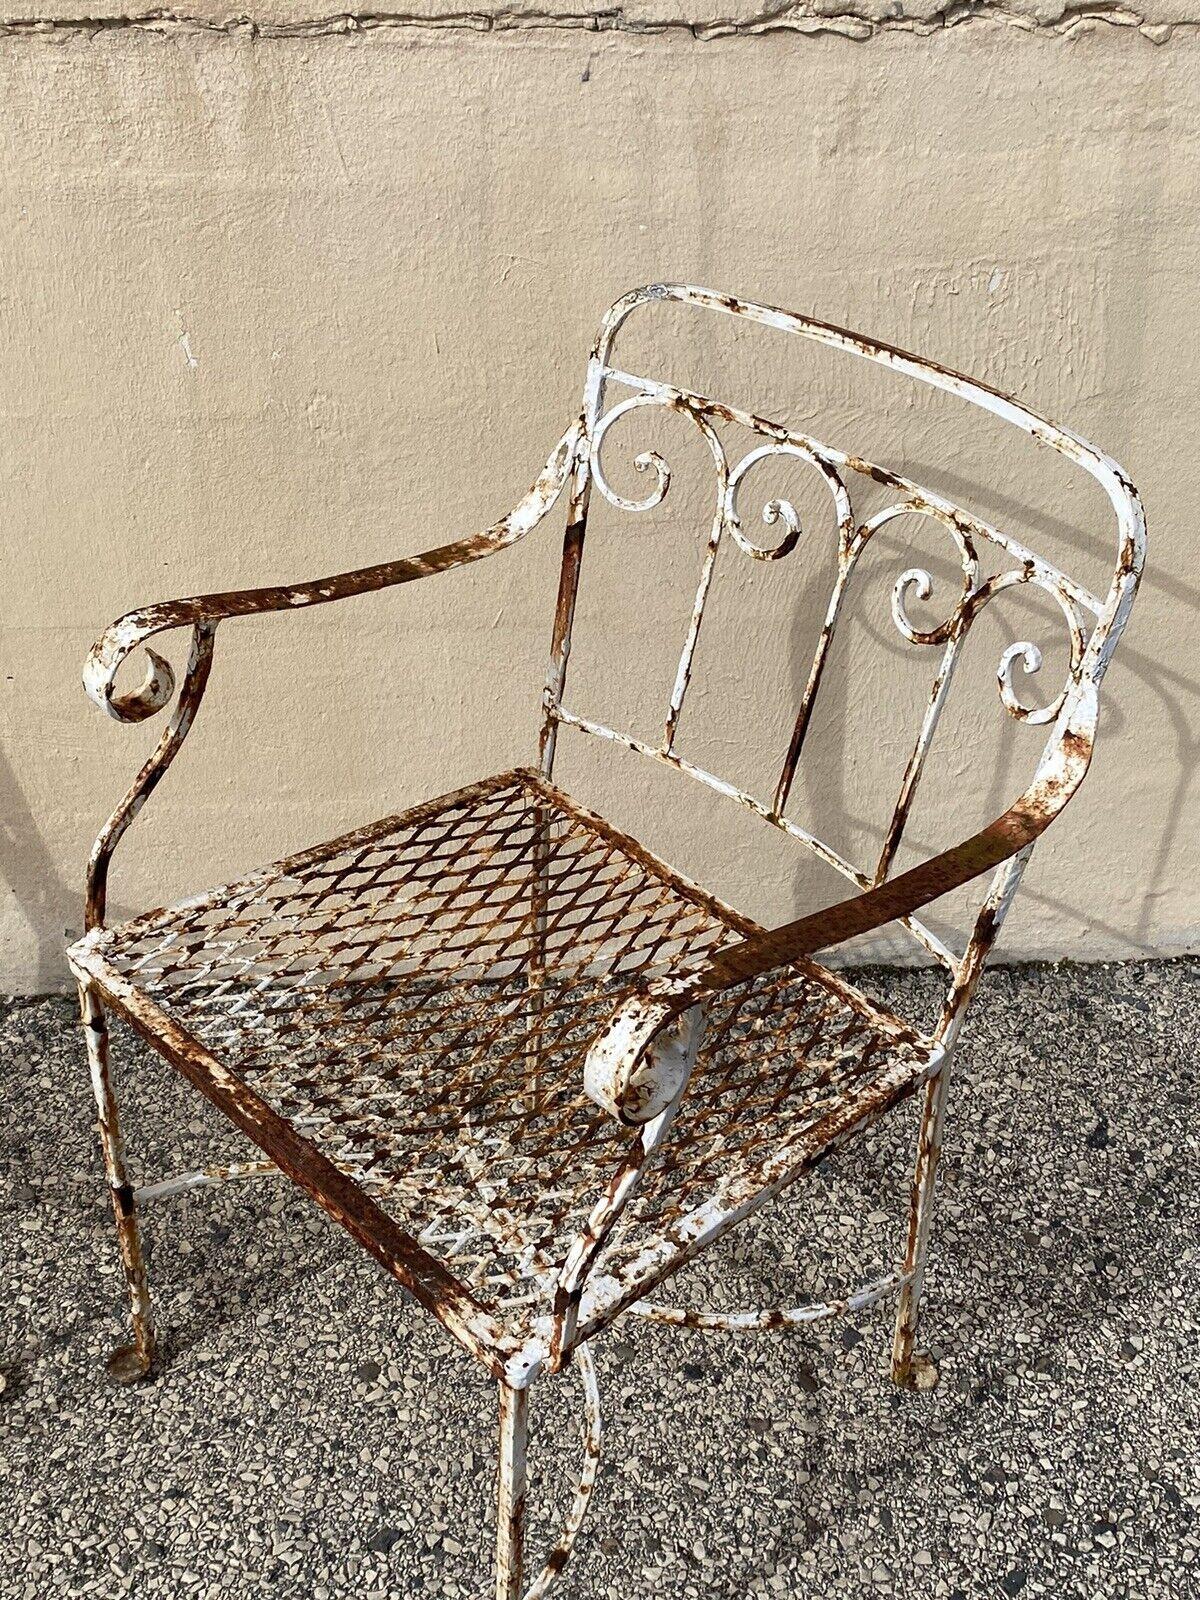 Antique Art Nouveau Scrolling Wrought Iron Garden Patio Dining Chairs - A Pair For Sale 8